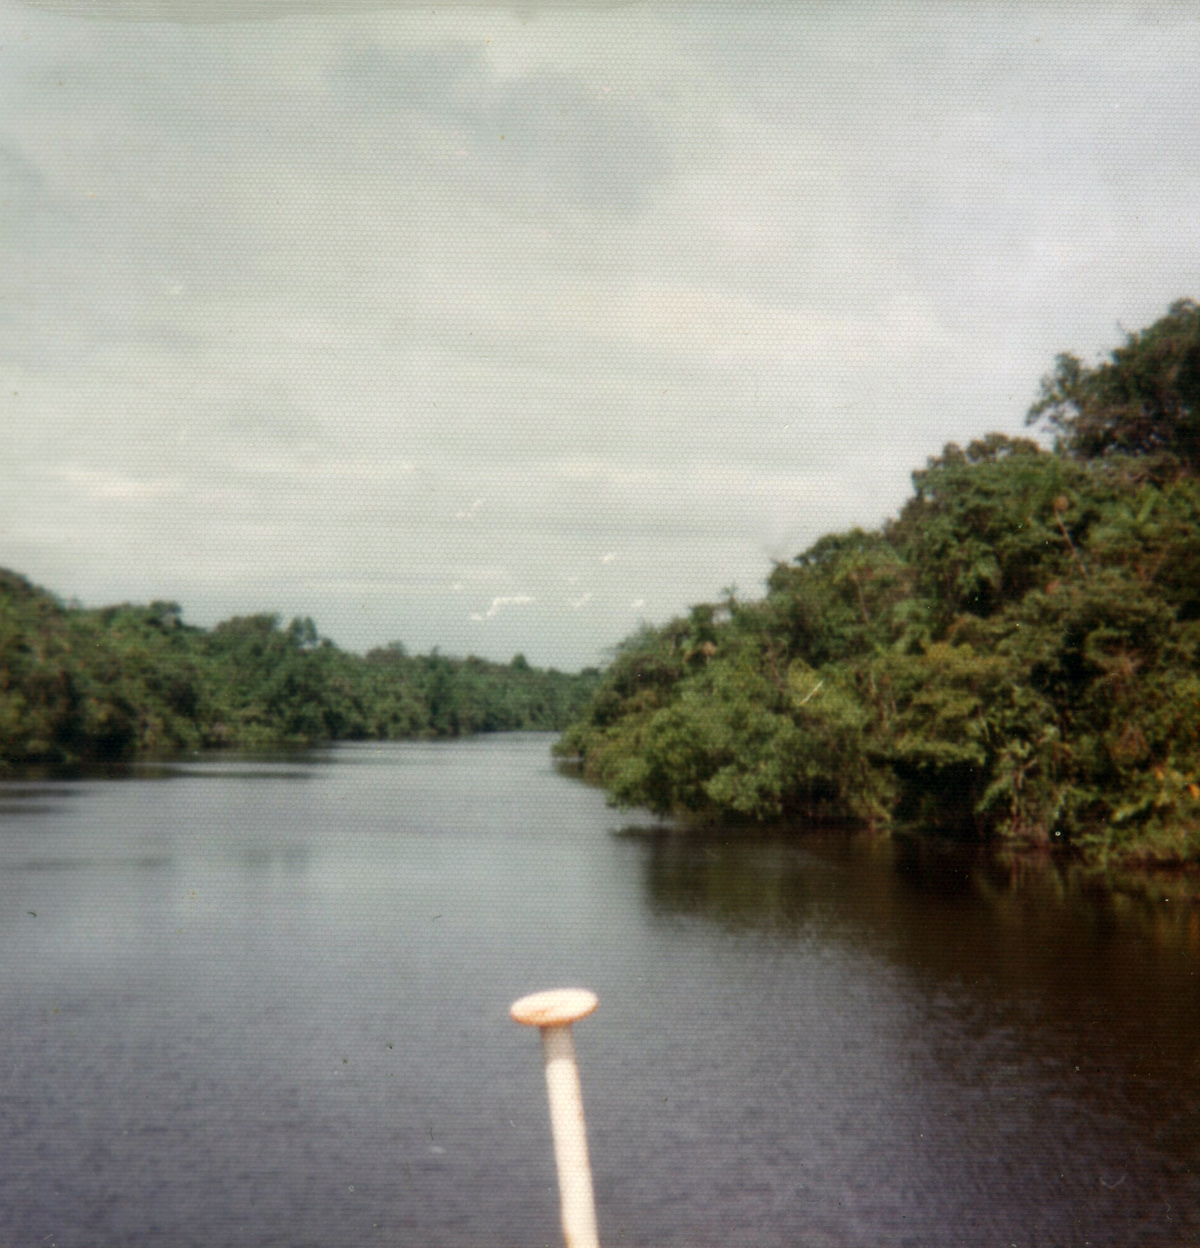 Traveling up the Kaituma River in the Cudjo